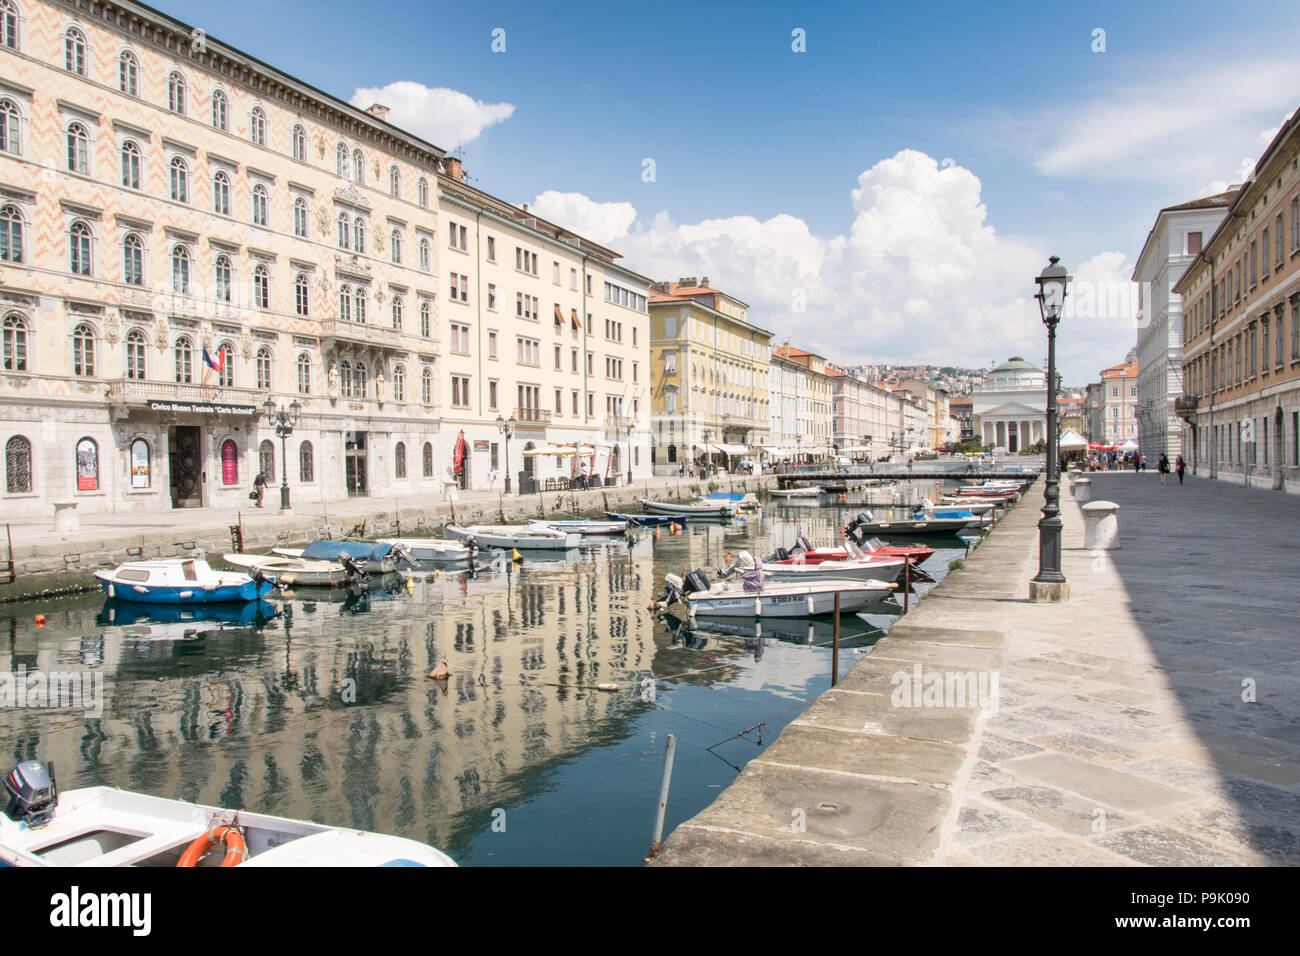 Europe, Italy, Trieste - Calm aftrenoon at Canale Grande, motorboats parked, tourist walking around and sightseeing. Stock Photo